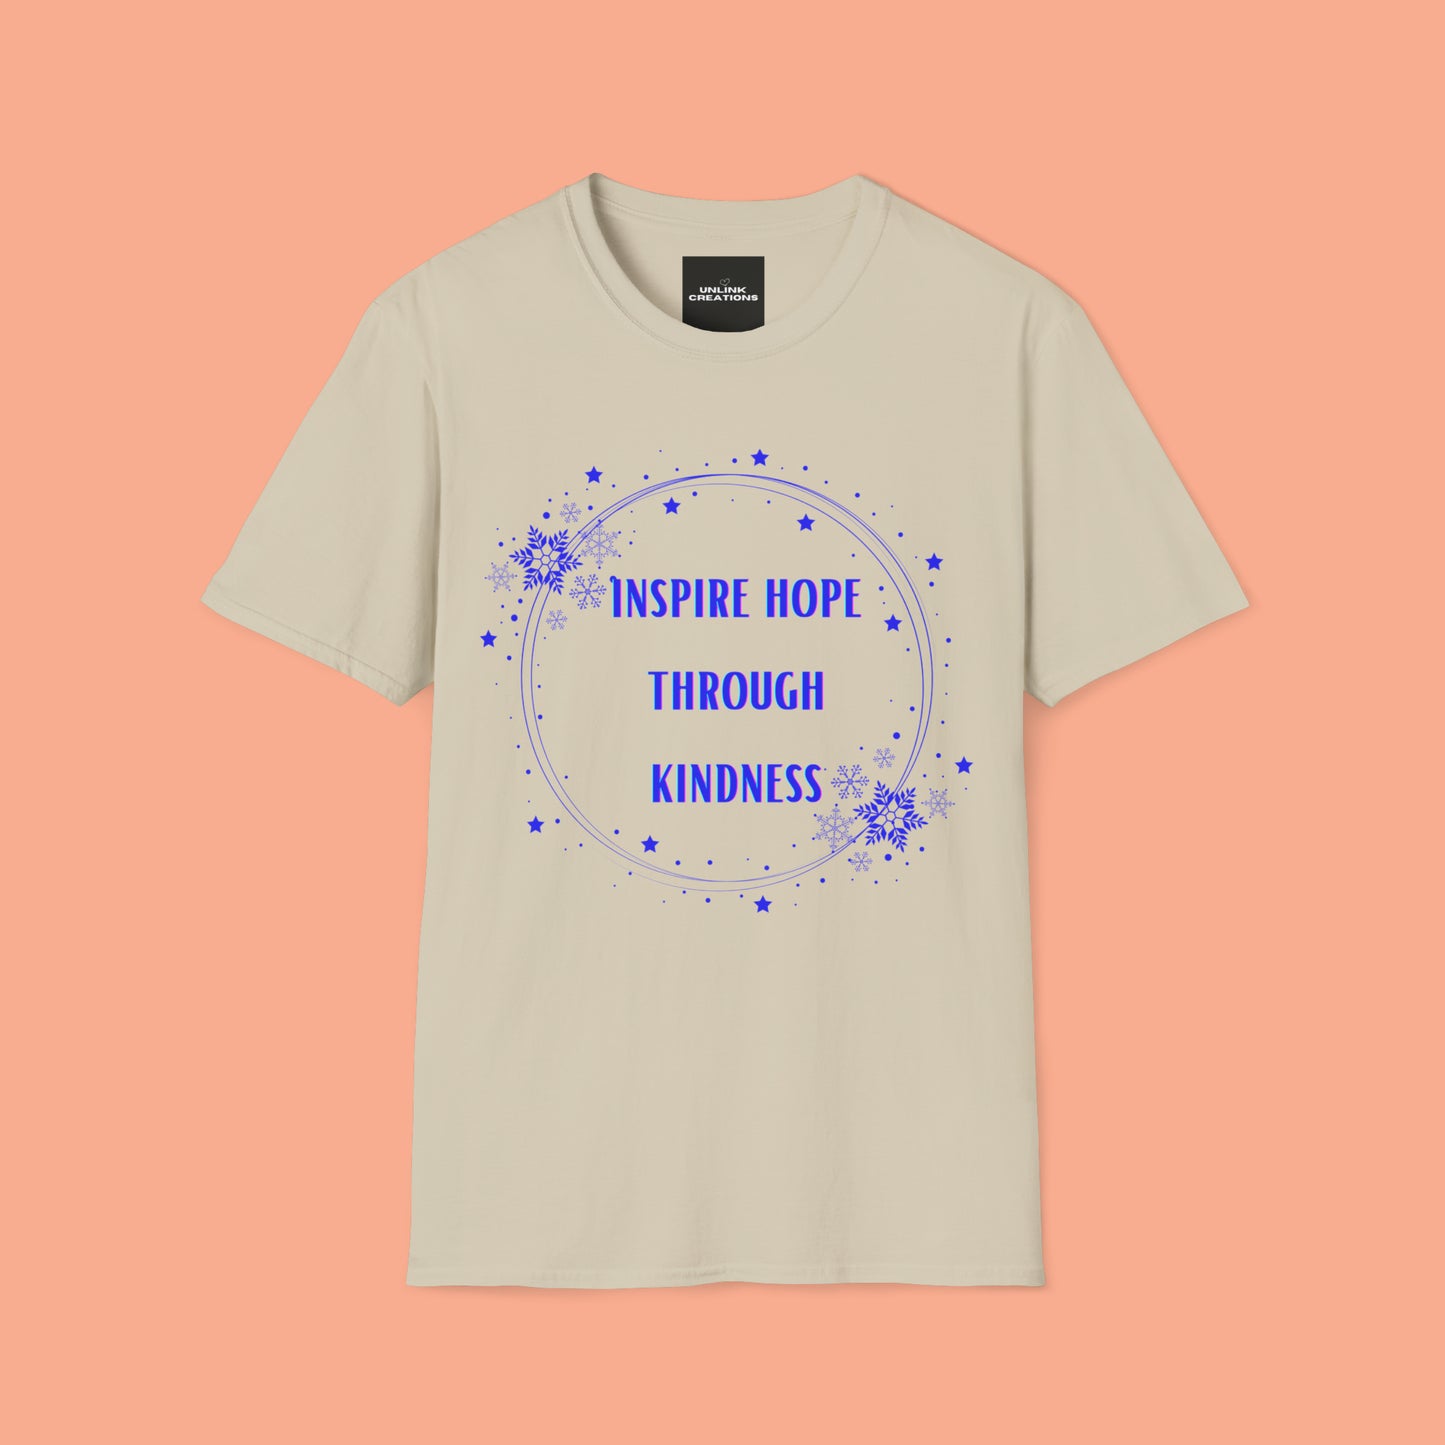 A message of “inspire hope through kindness” on this Unisex Softstyle T-Shirt.